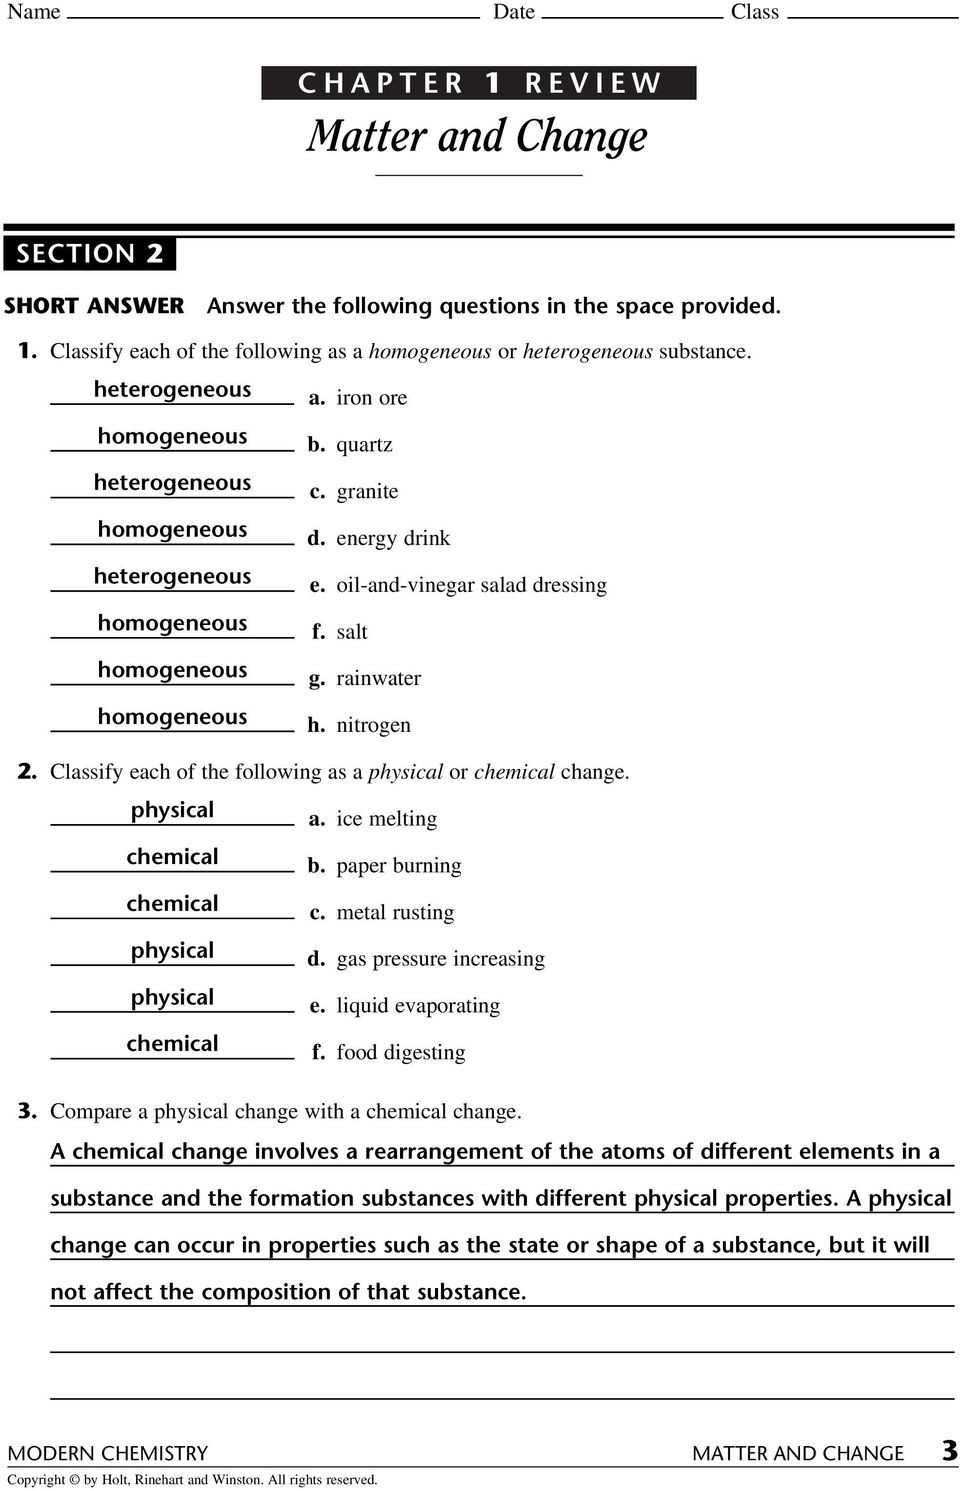 Classifying Matter Worksheet Answer Key Name Date Class Chapter 1 Review Answer the Following